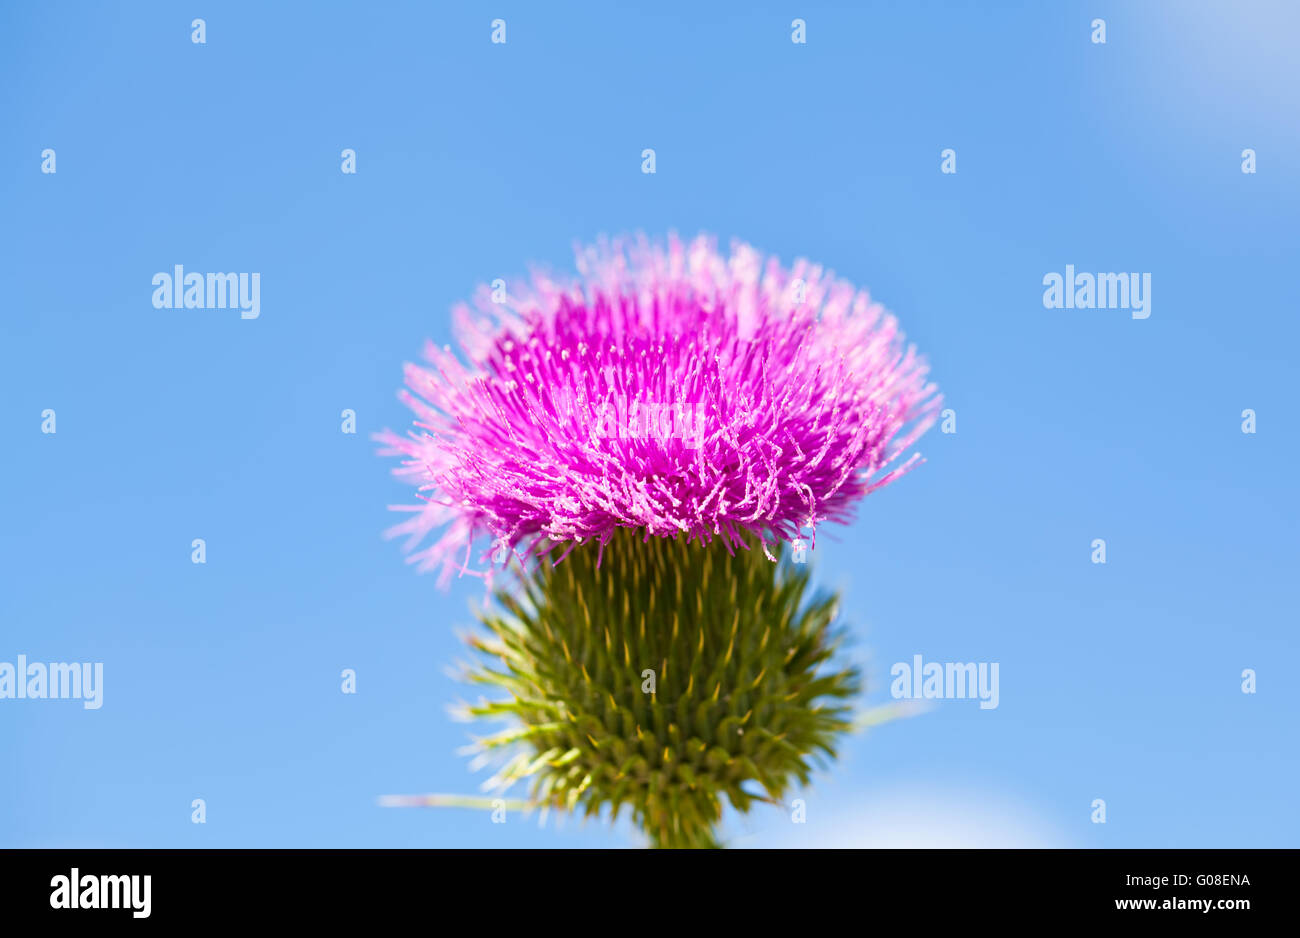 Wild thistle with pink flower on blue sky background Stock Photo